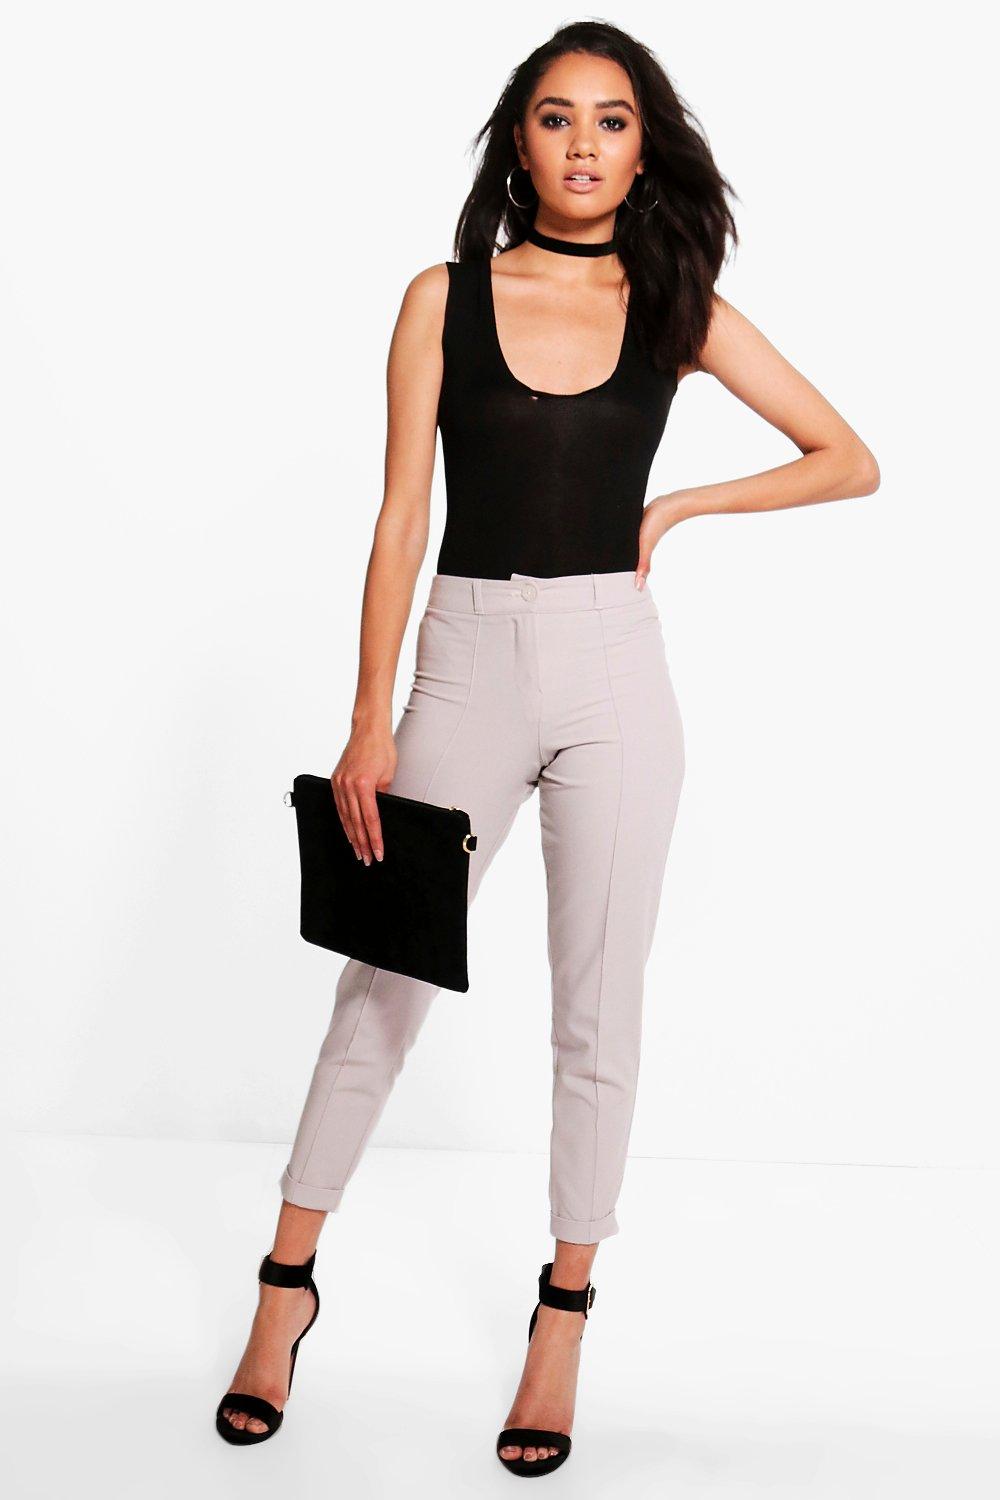 Boohoo Womens Petite Caitlin Turn Up Tailored Woven Trousers | eBay